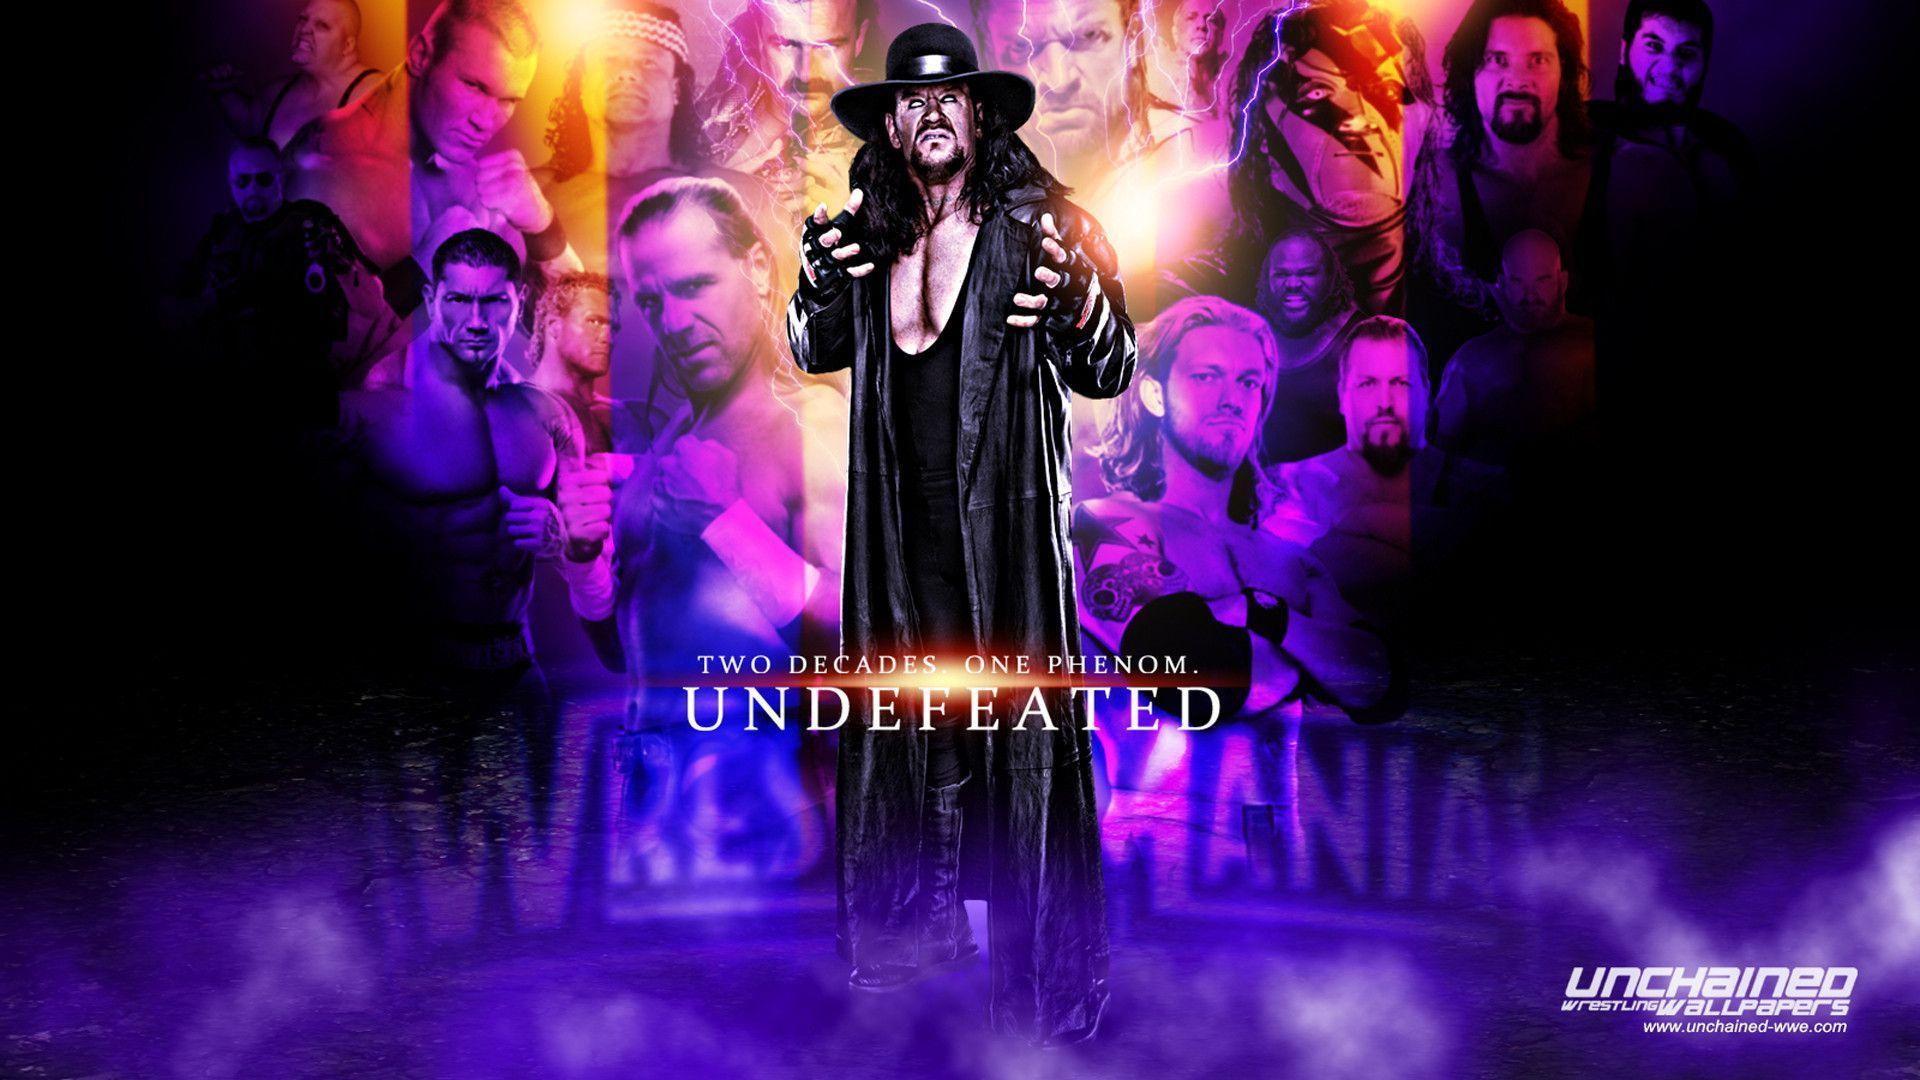 WWE The Undertaker "Undefeated" Wallpaper Unchained WWE.com